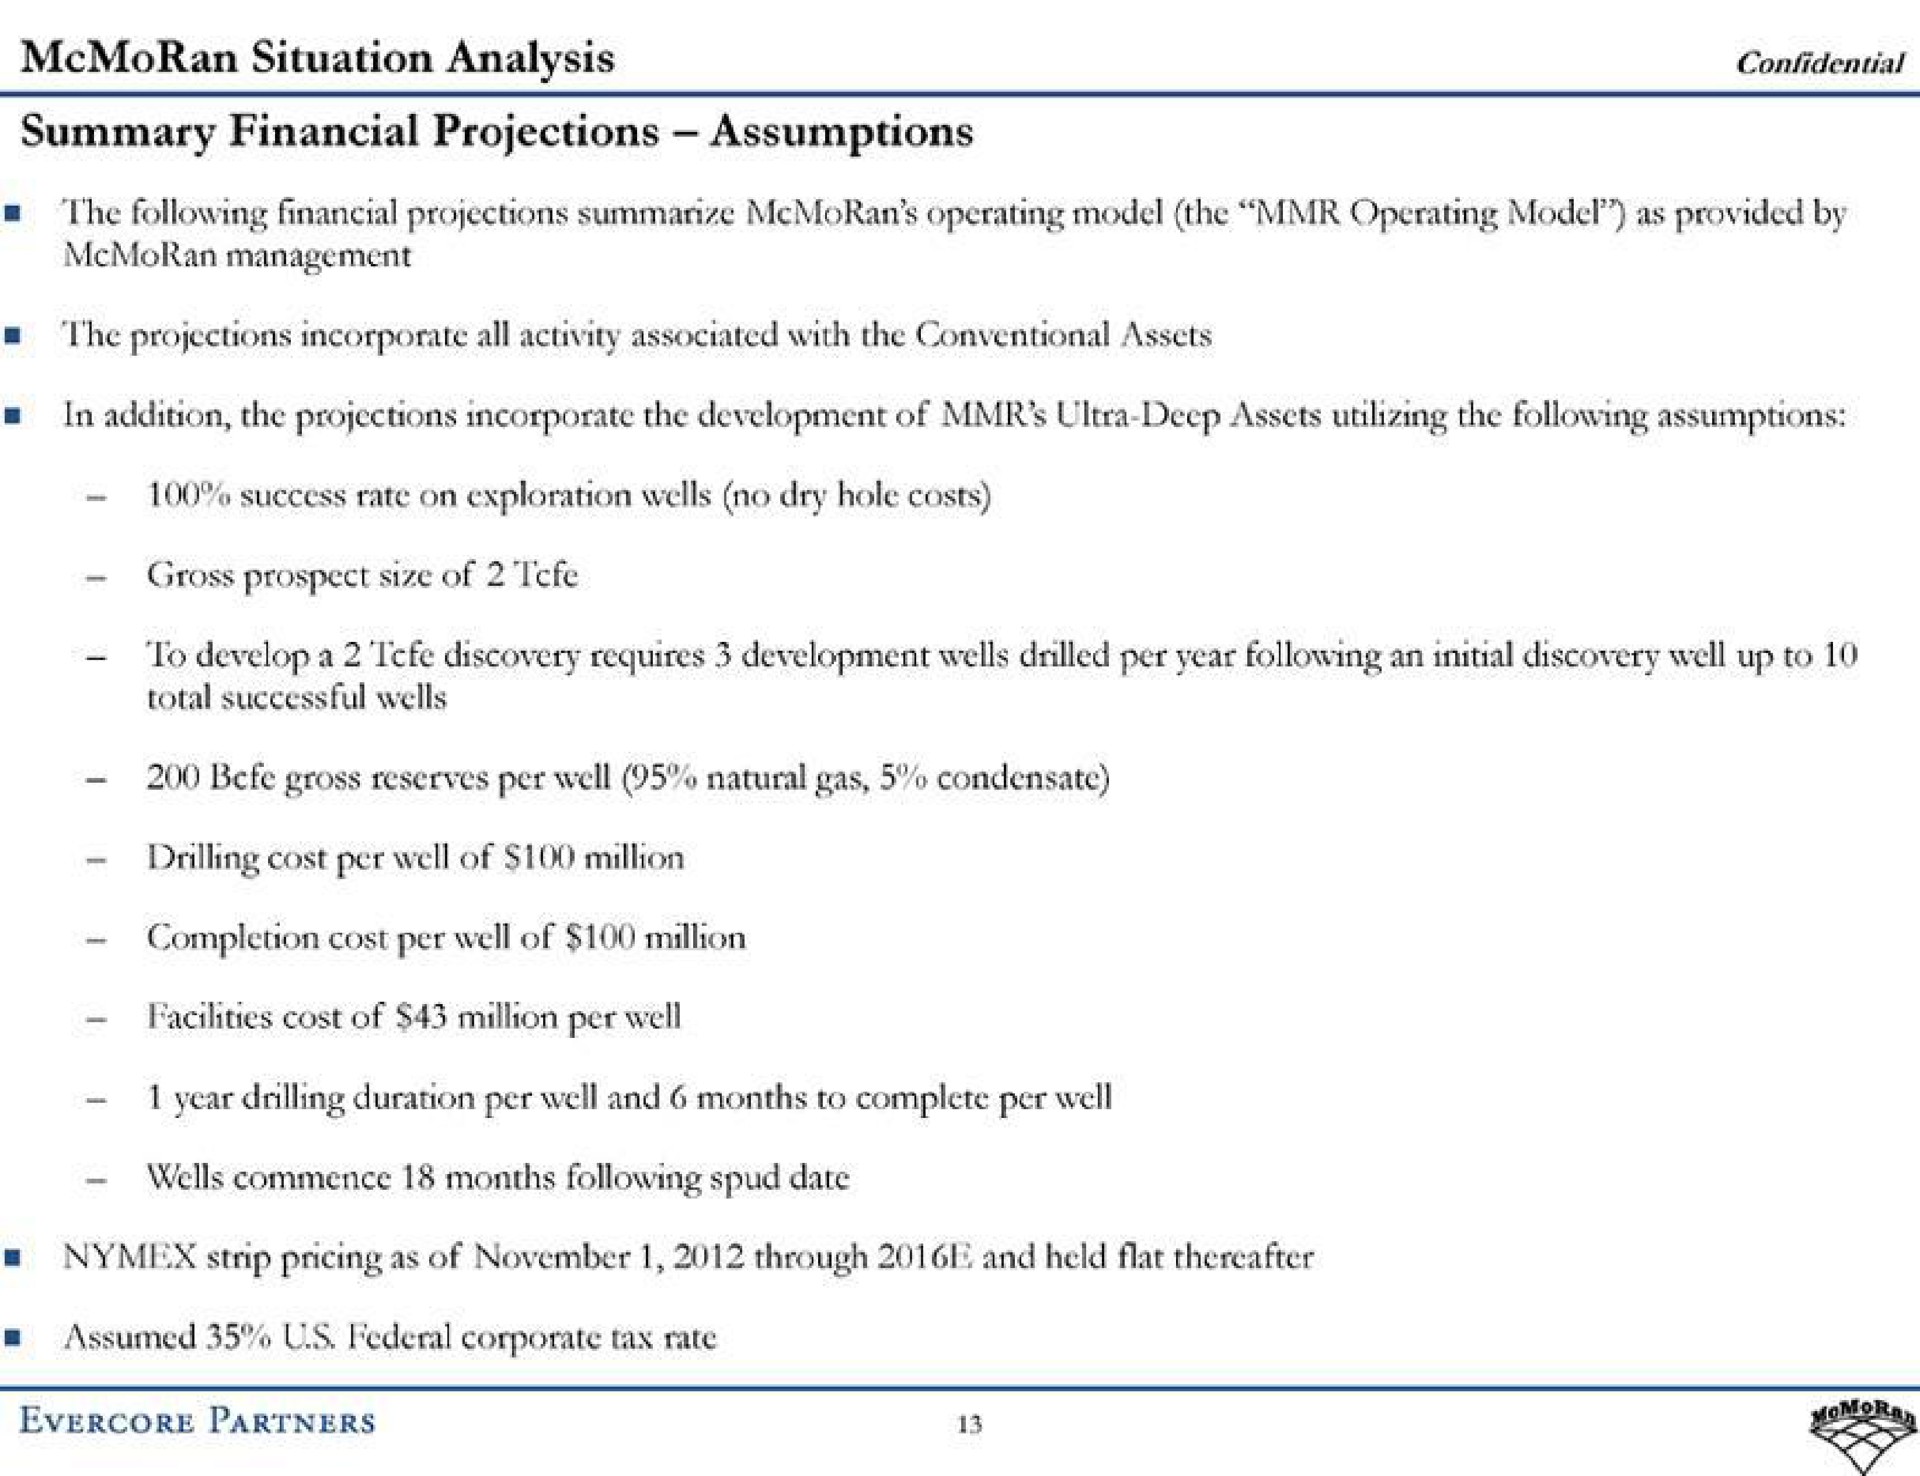 situation analysis summary financial projections assumptions confidential the following financial projections operating model the operating model as provided by the projections incorporate all activity associated with the conventional assets in addition the projections incorporate the development of ultra deep assets utilizing the following assumptions gross prospect size of to discovery requires development wells drilled per year following an initial discovery well up to total successful wells gross reserves per well natural gas condensate facilities cost of million per well year drilling duration per well and months to complete per well wells commence months following spud date strip pricing as of through and held flat thereafter assumed us corporate tax rate partners | Evercore